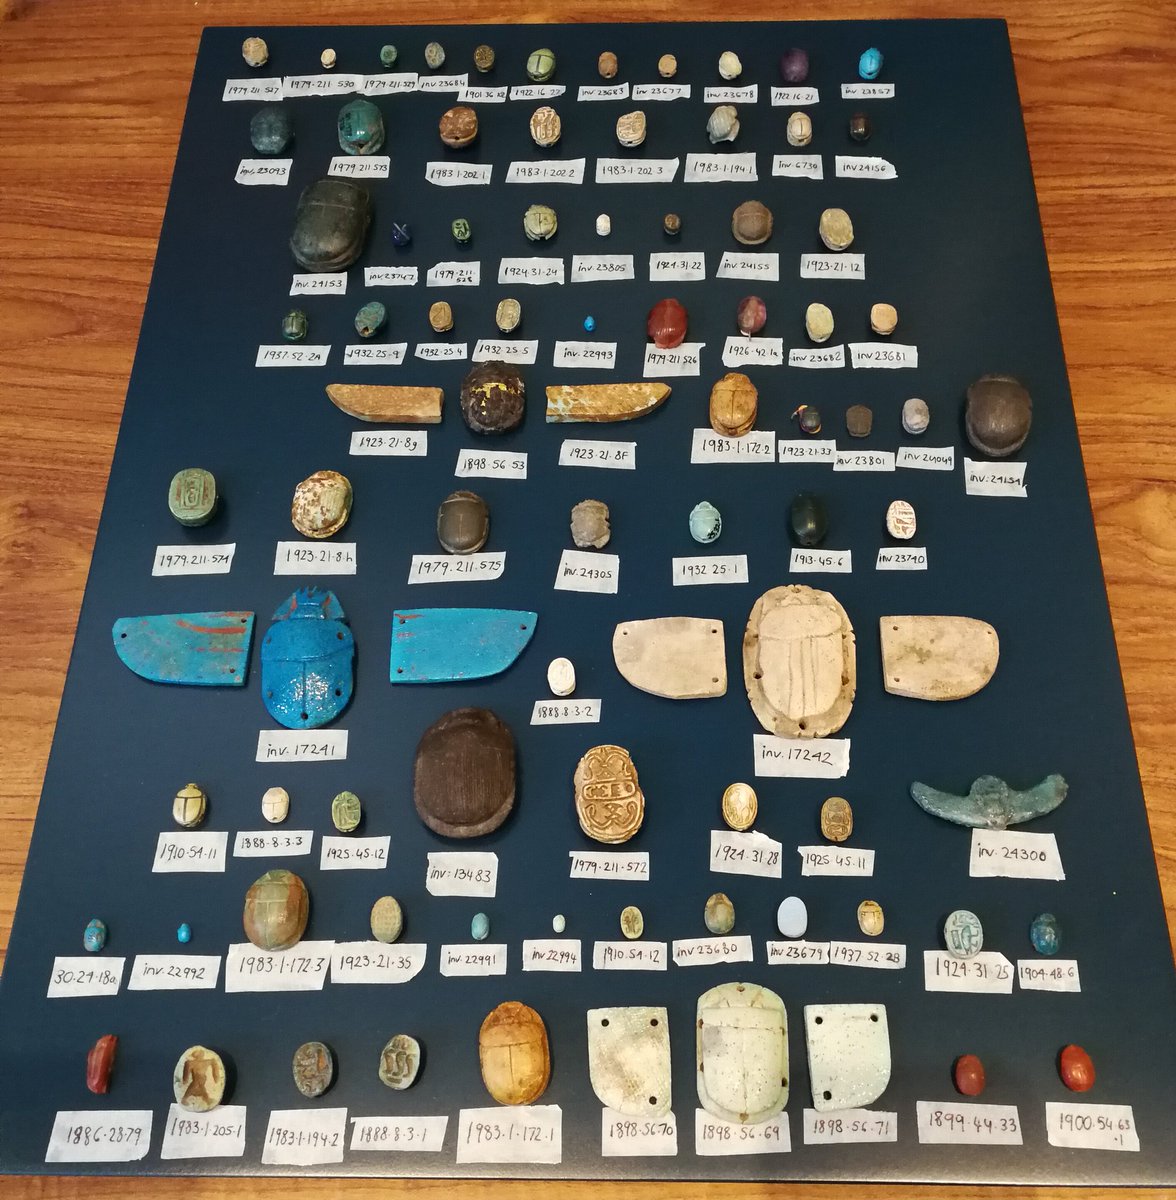 Organising scarabs for display yestersay at @BoltonLMS, what a wonderful and diverse collection!  #BoltonsEgypt #Bolton #Egyptology #ancientEgypt #museum